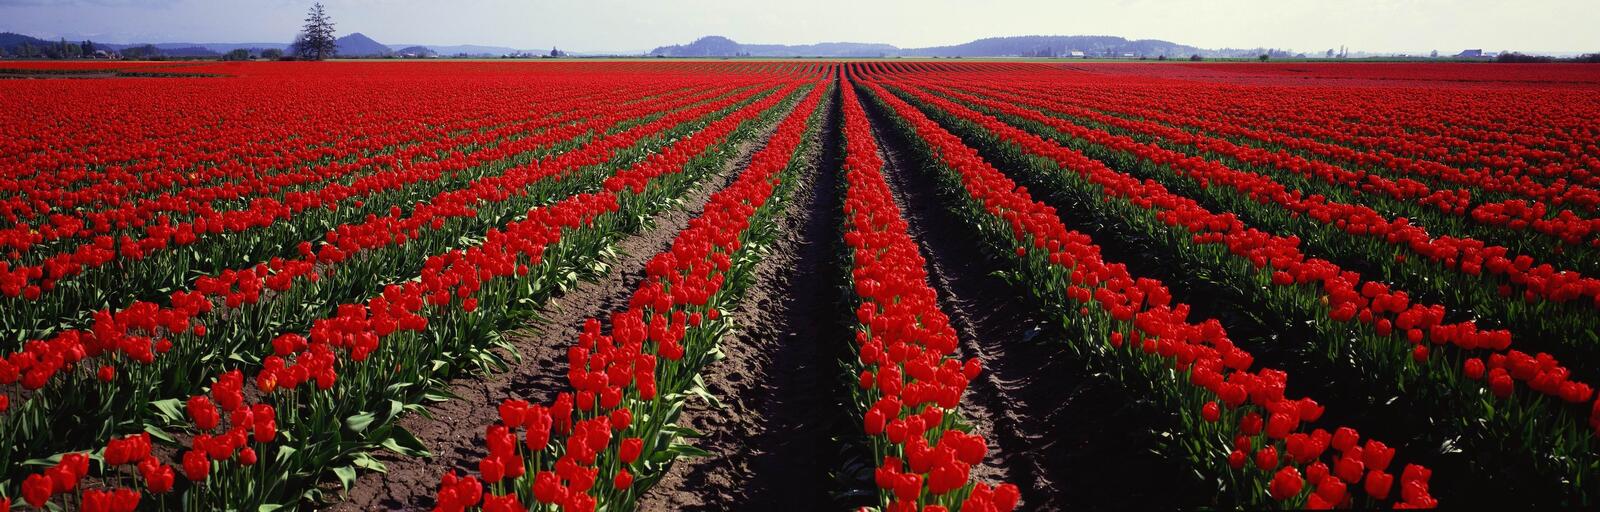 Free photo A field of red tulips